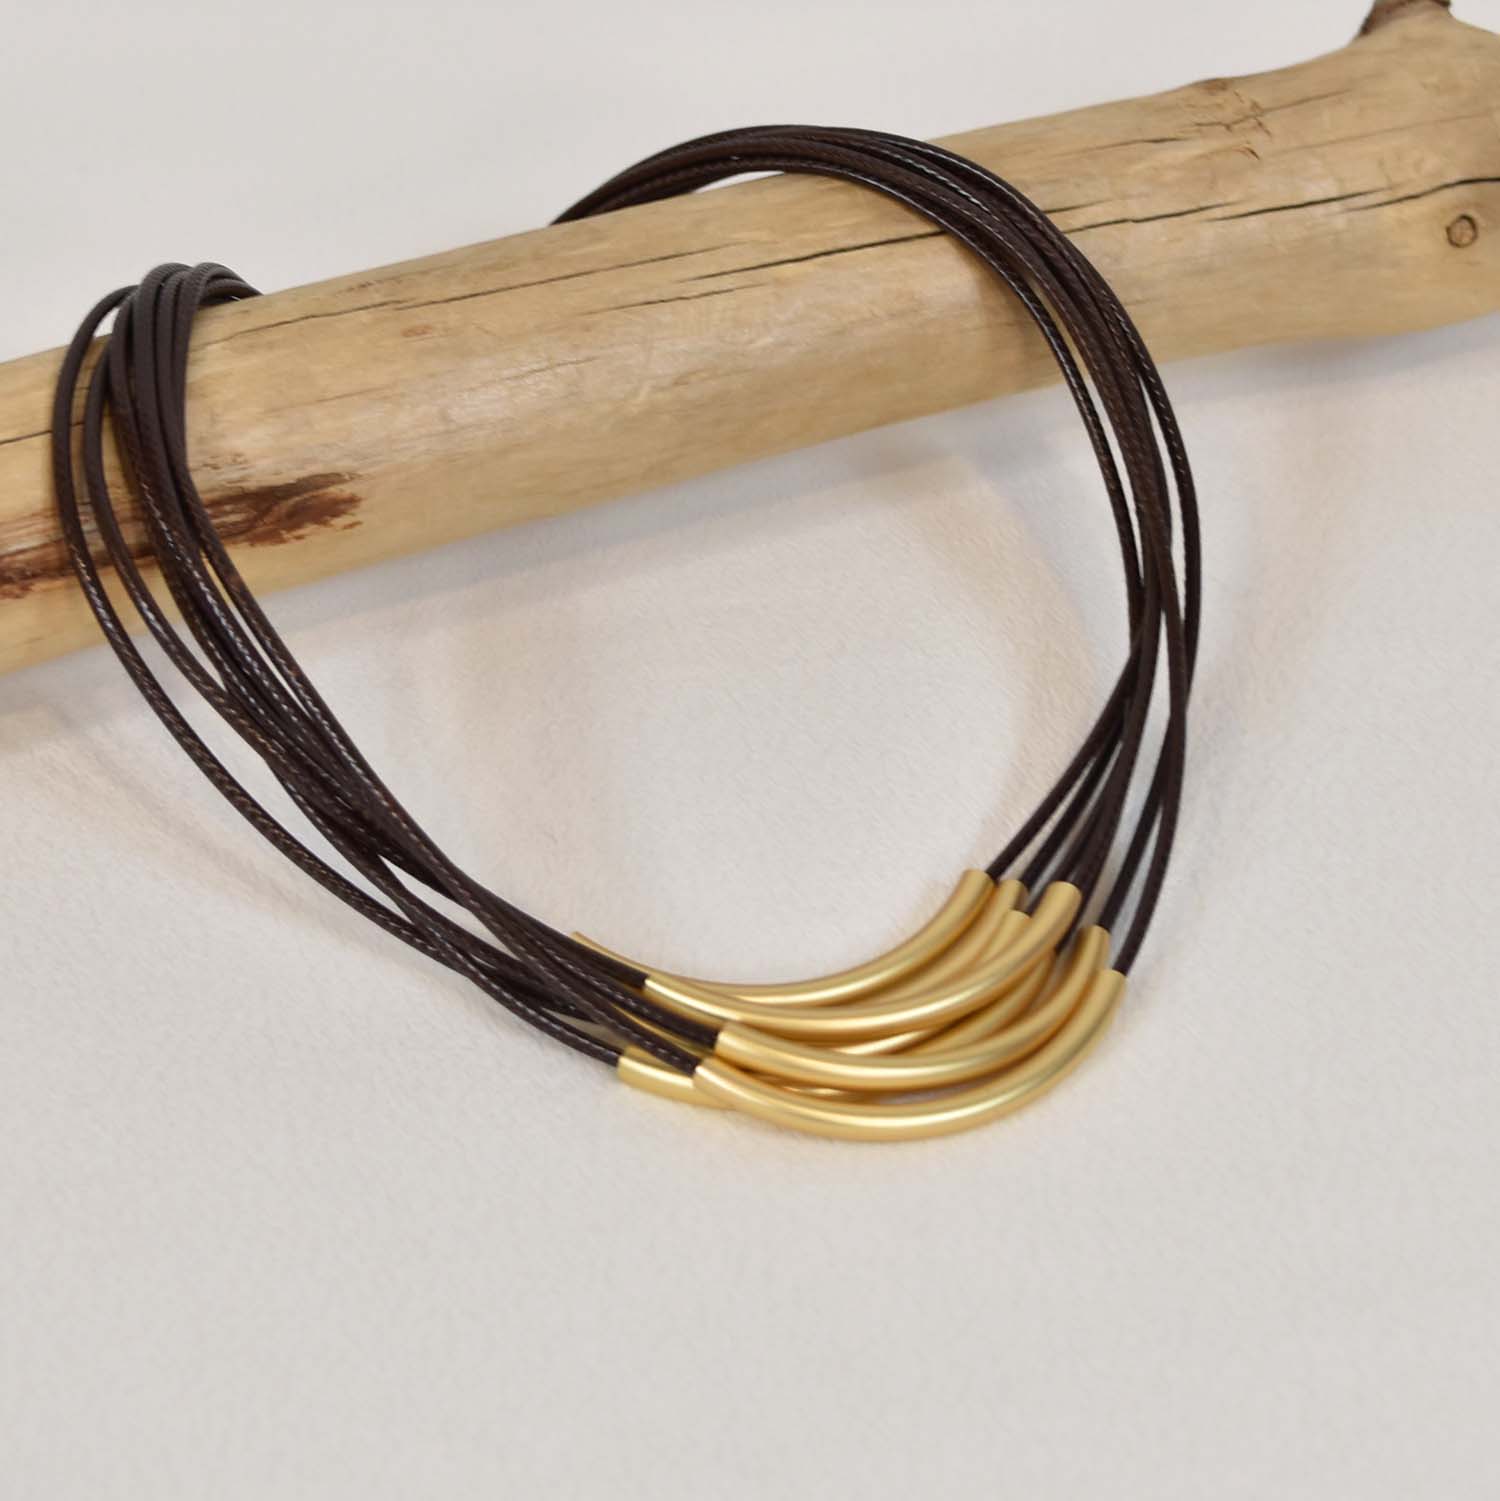 Brown gold waxed strings necklace